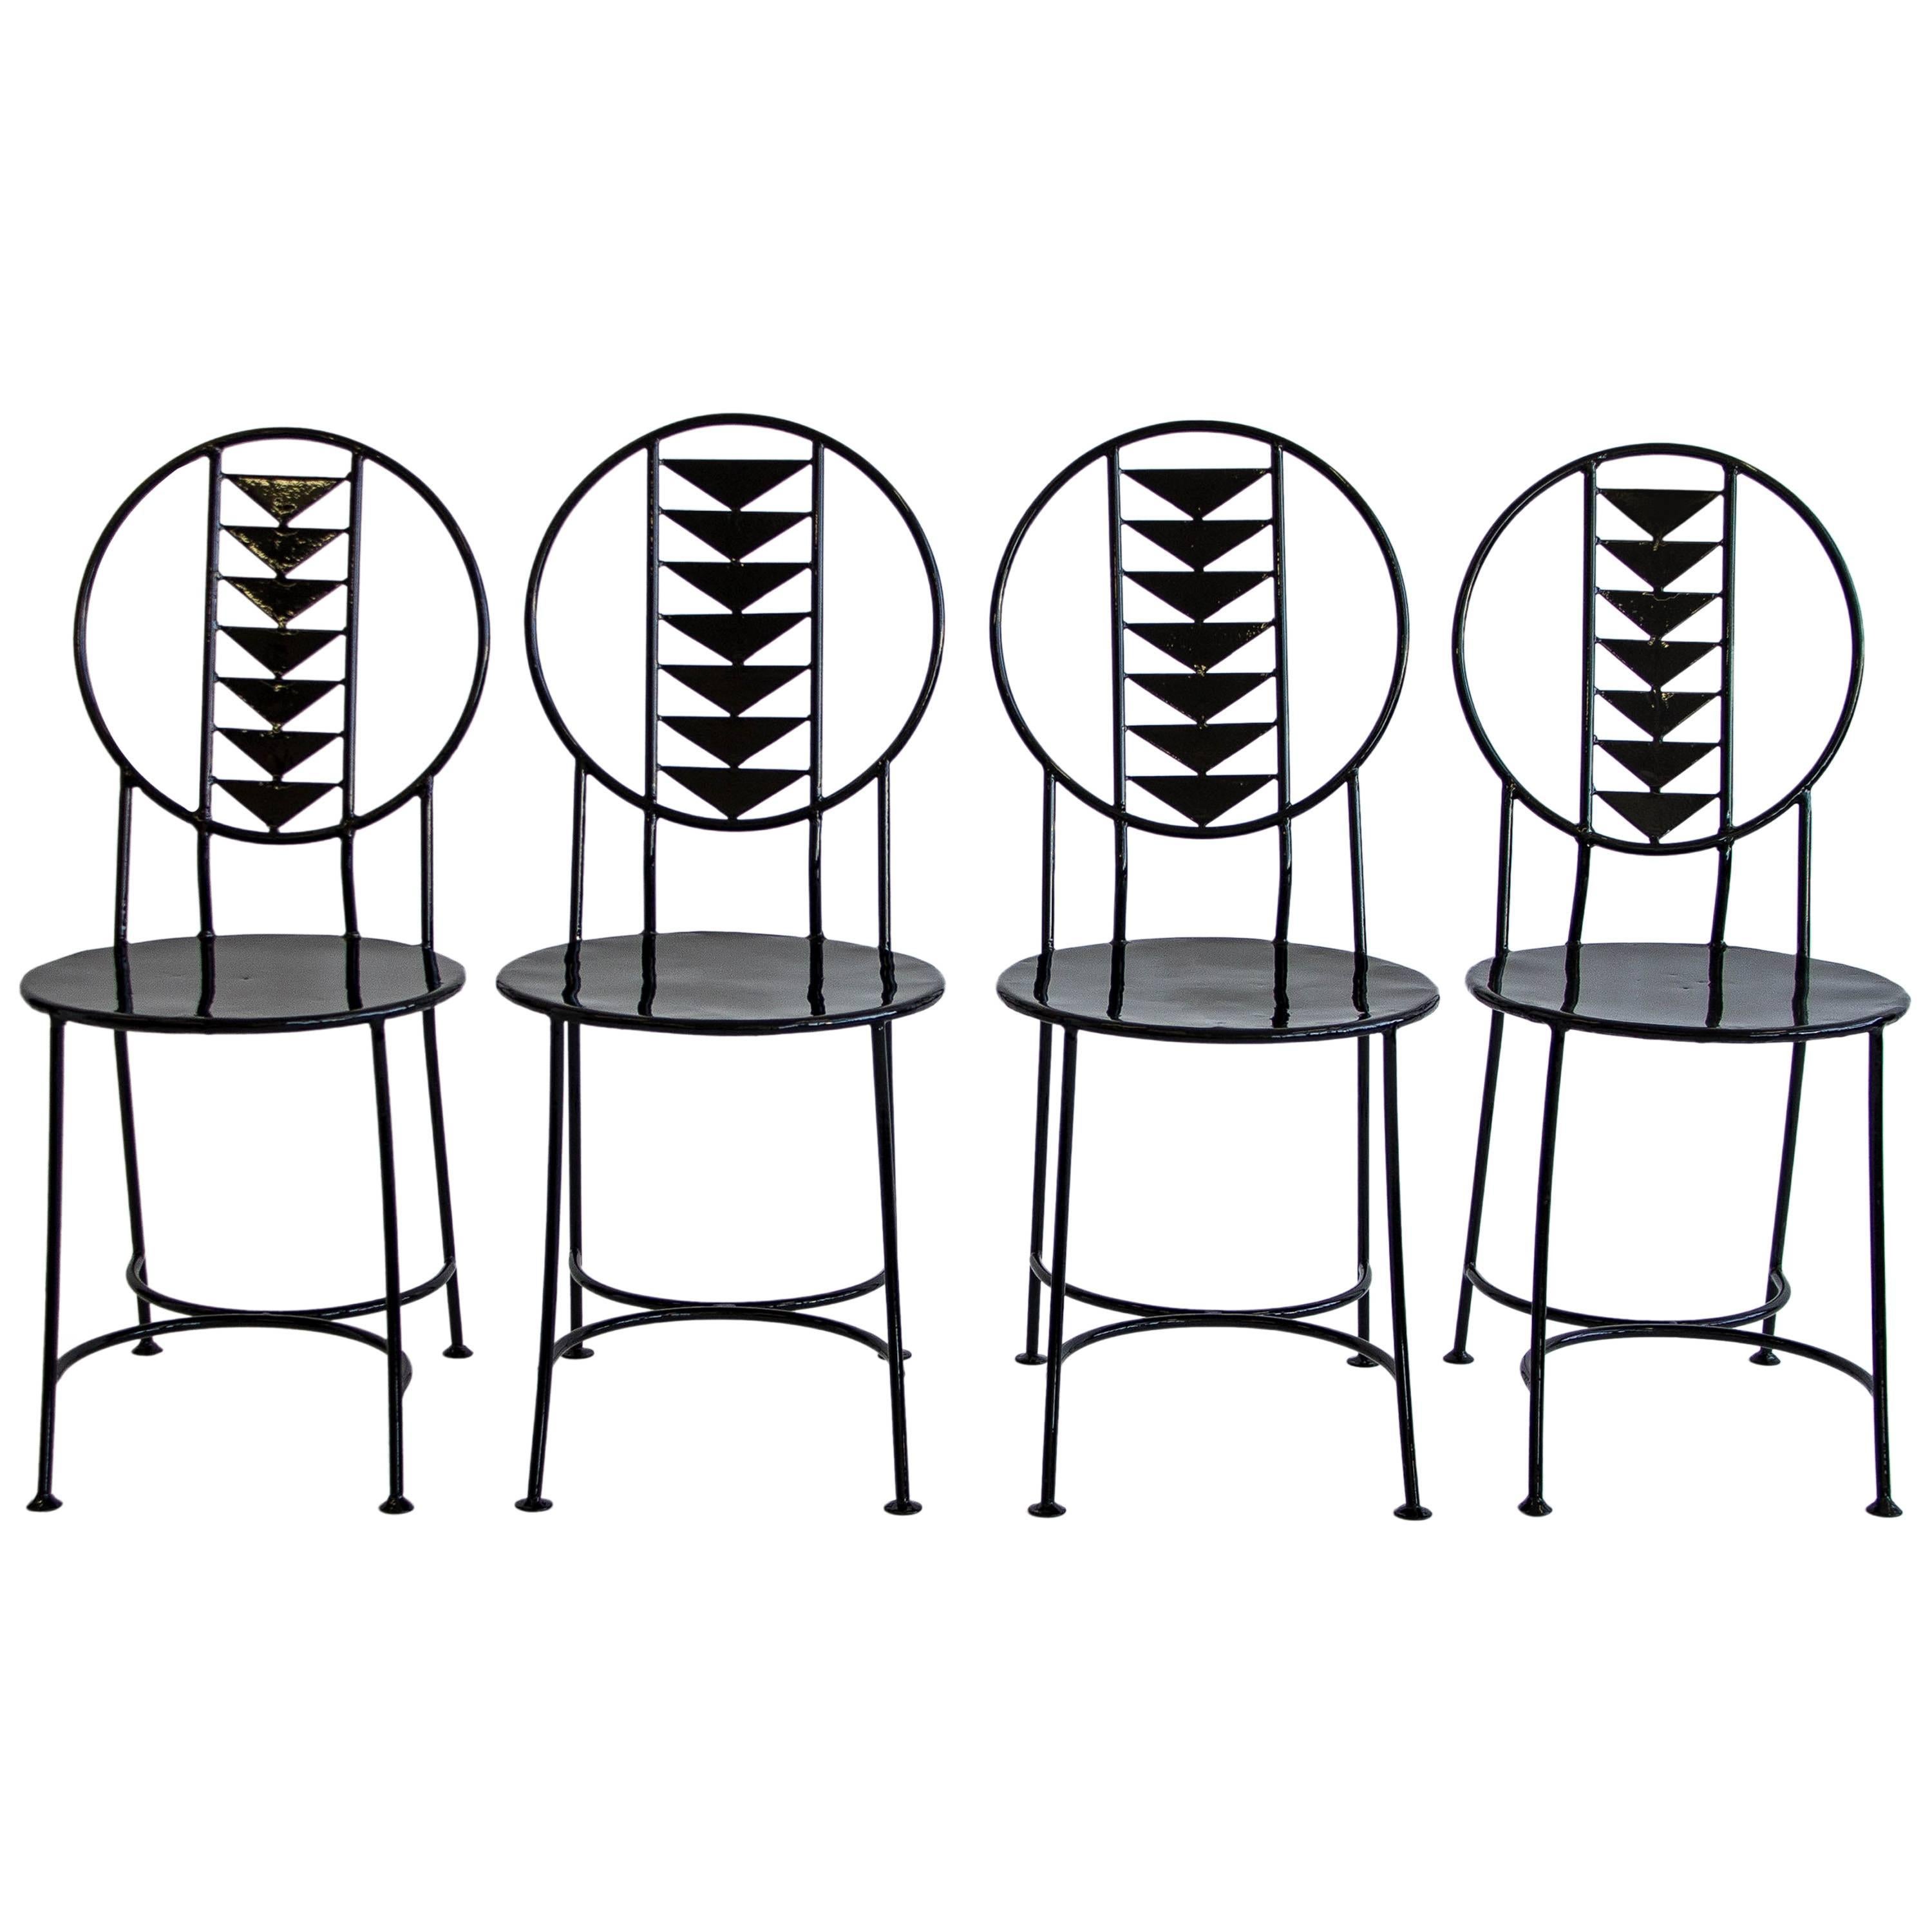 Set of Wrought Iron Chairs in the Style of Frank Lloyd Wright's Midway Chair